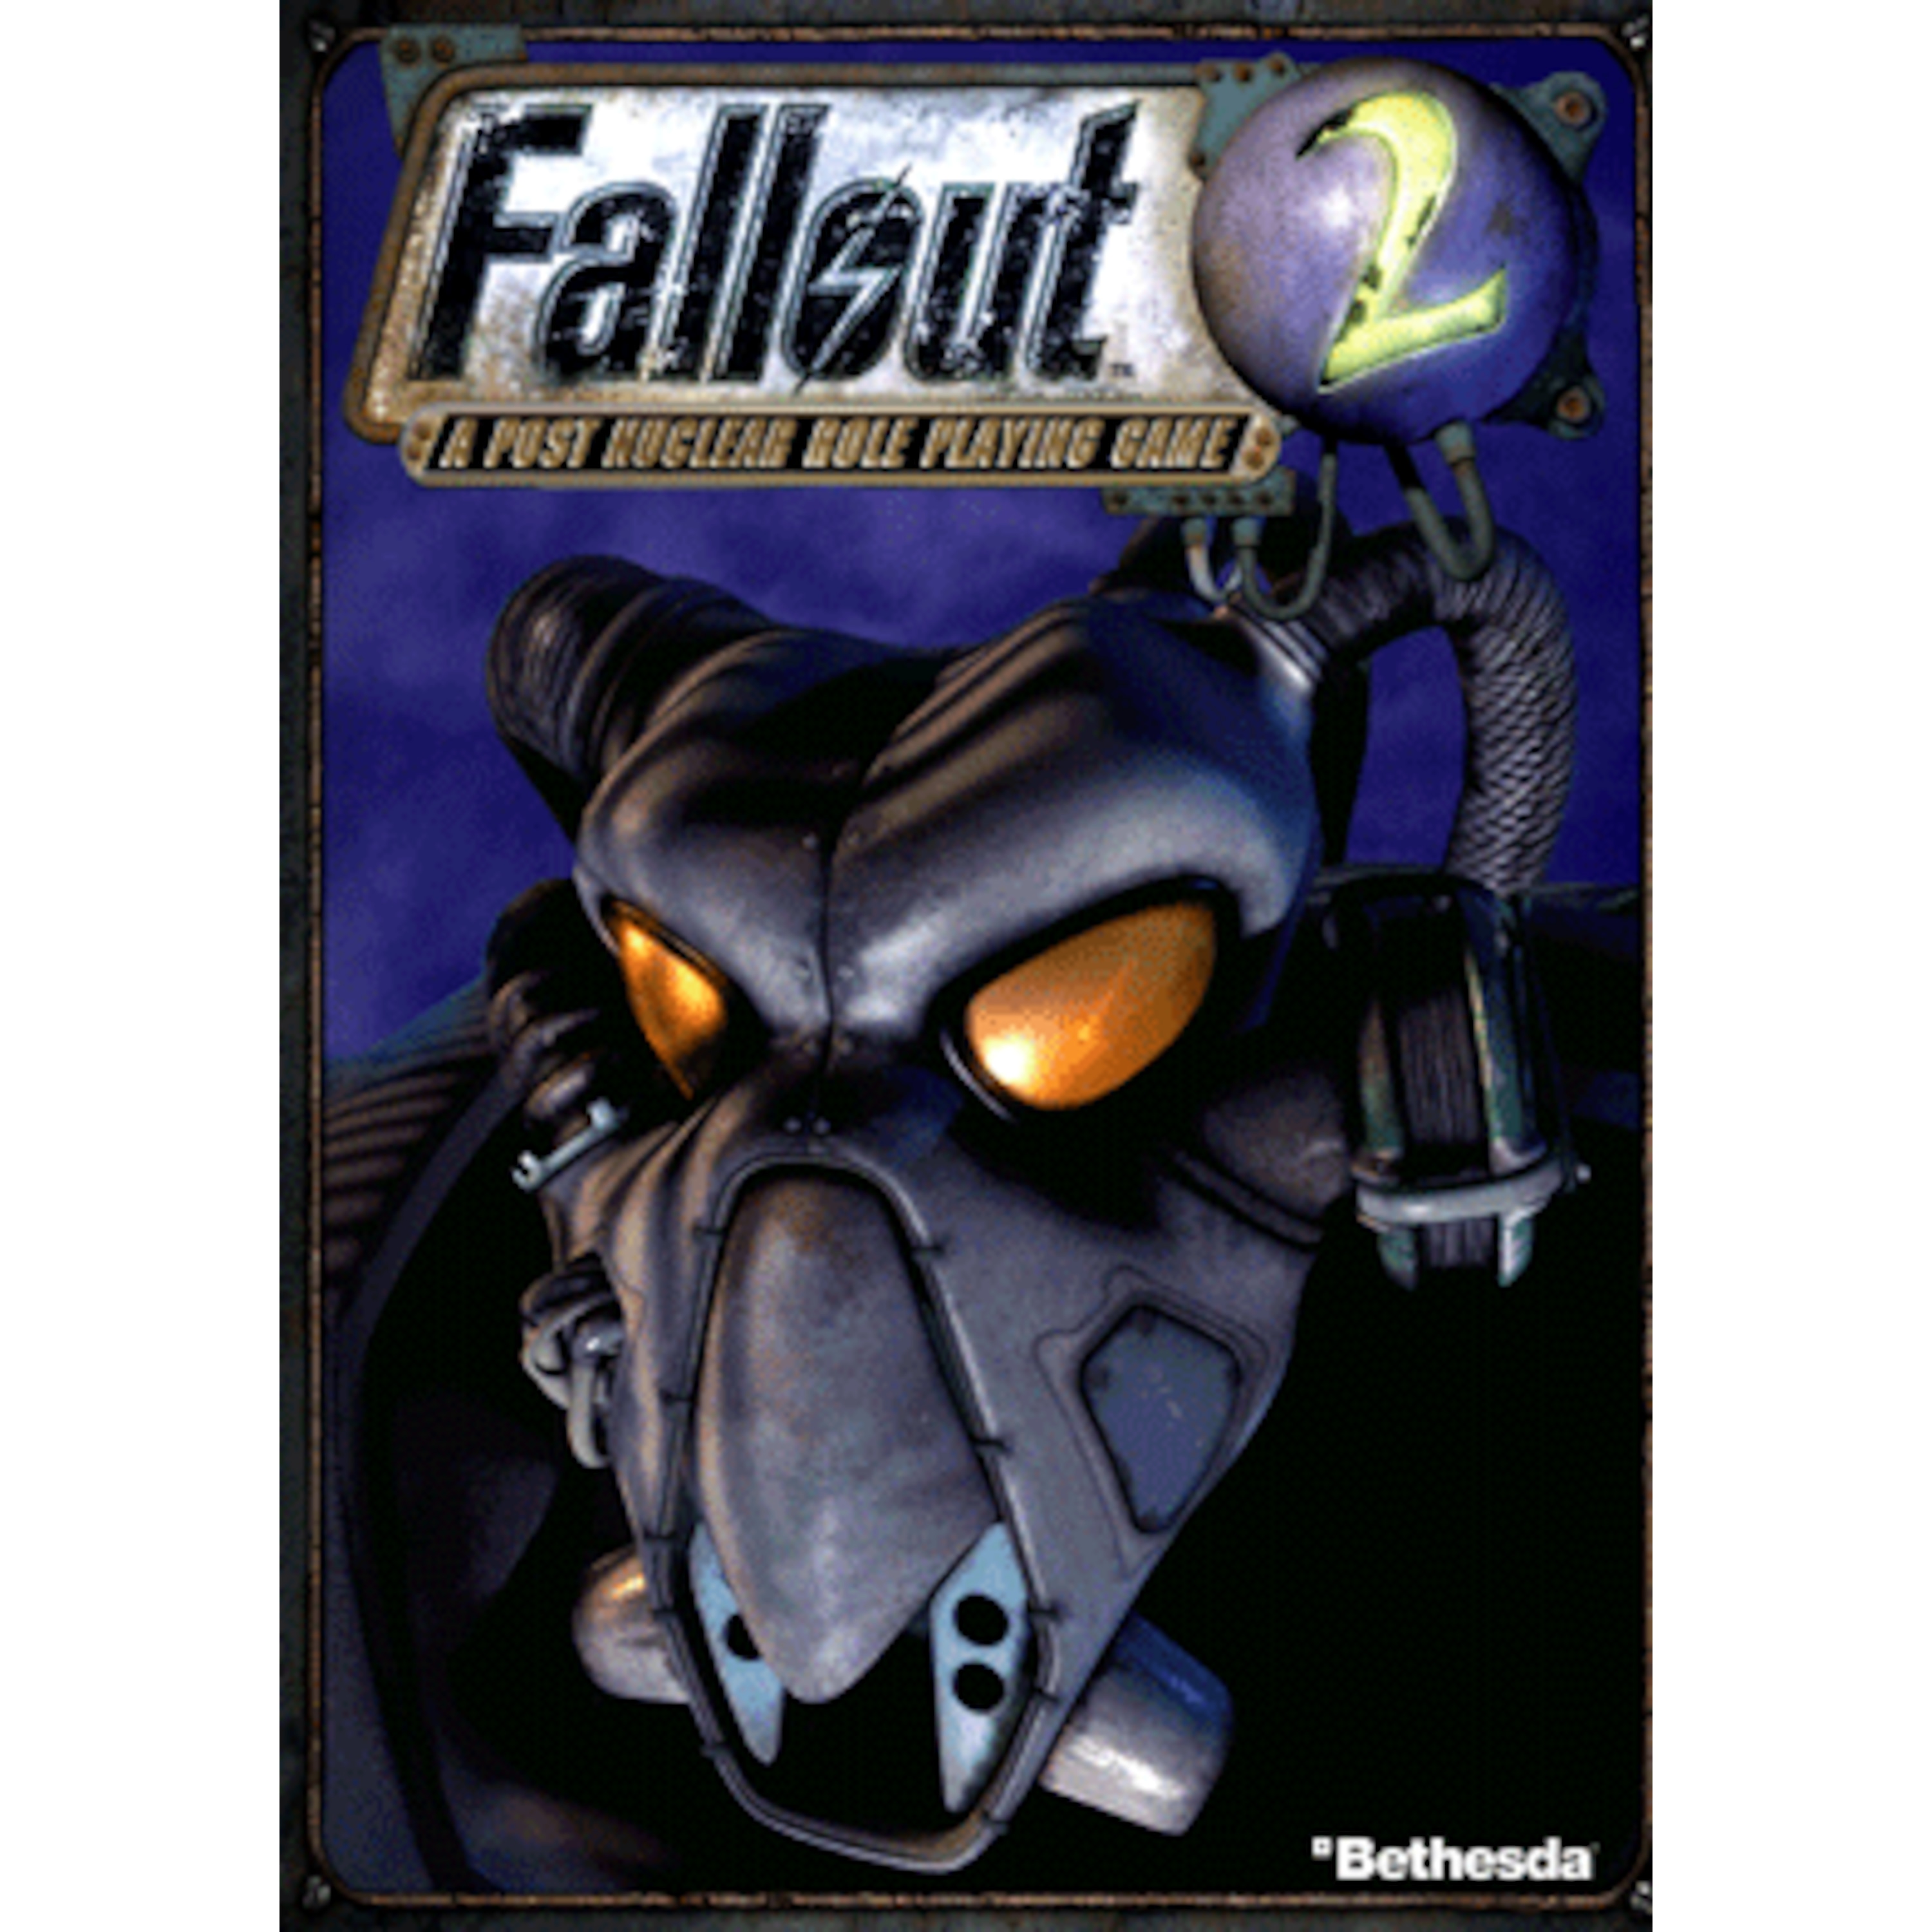 download the new version for apple Fallout 2: A Post Nuclear Role Playing Game